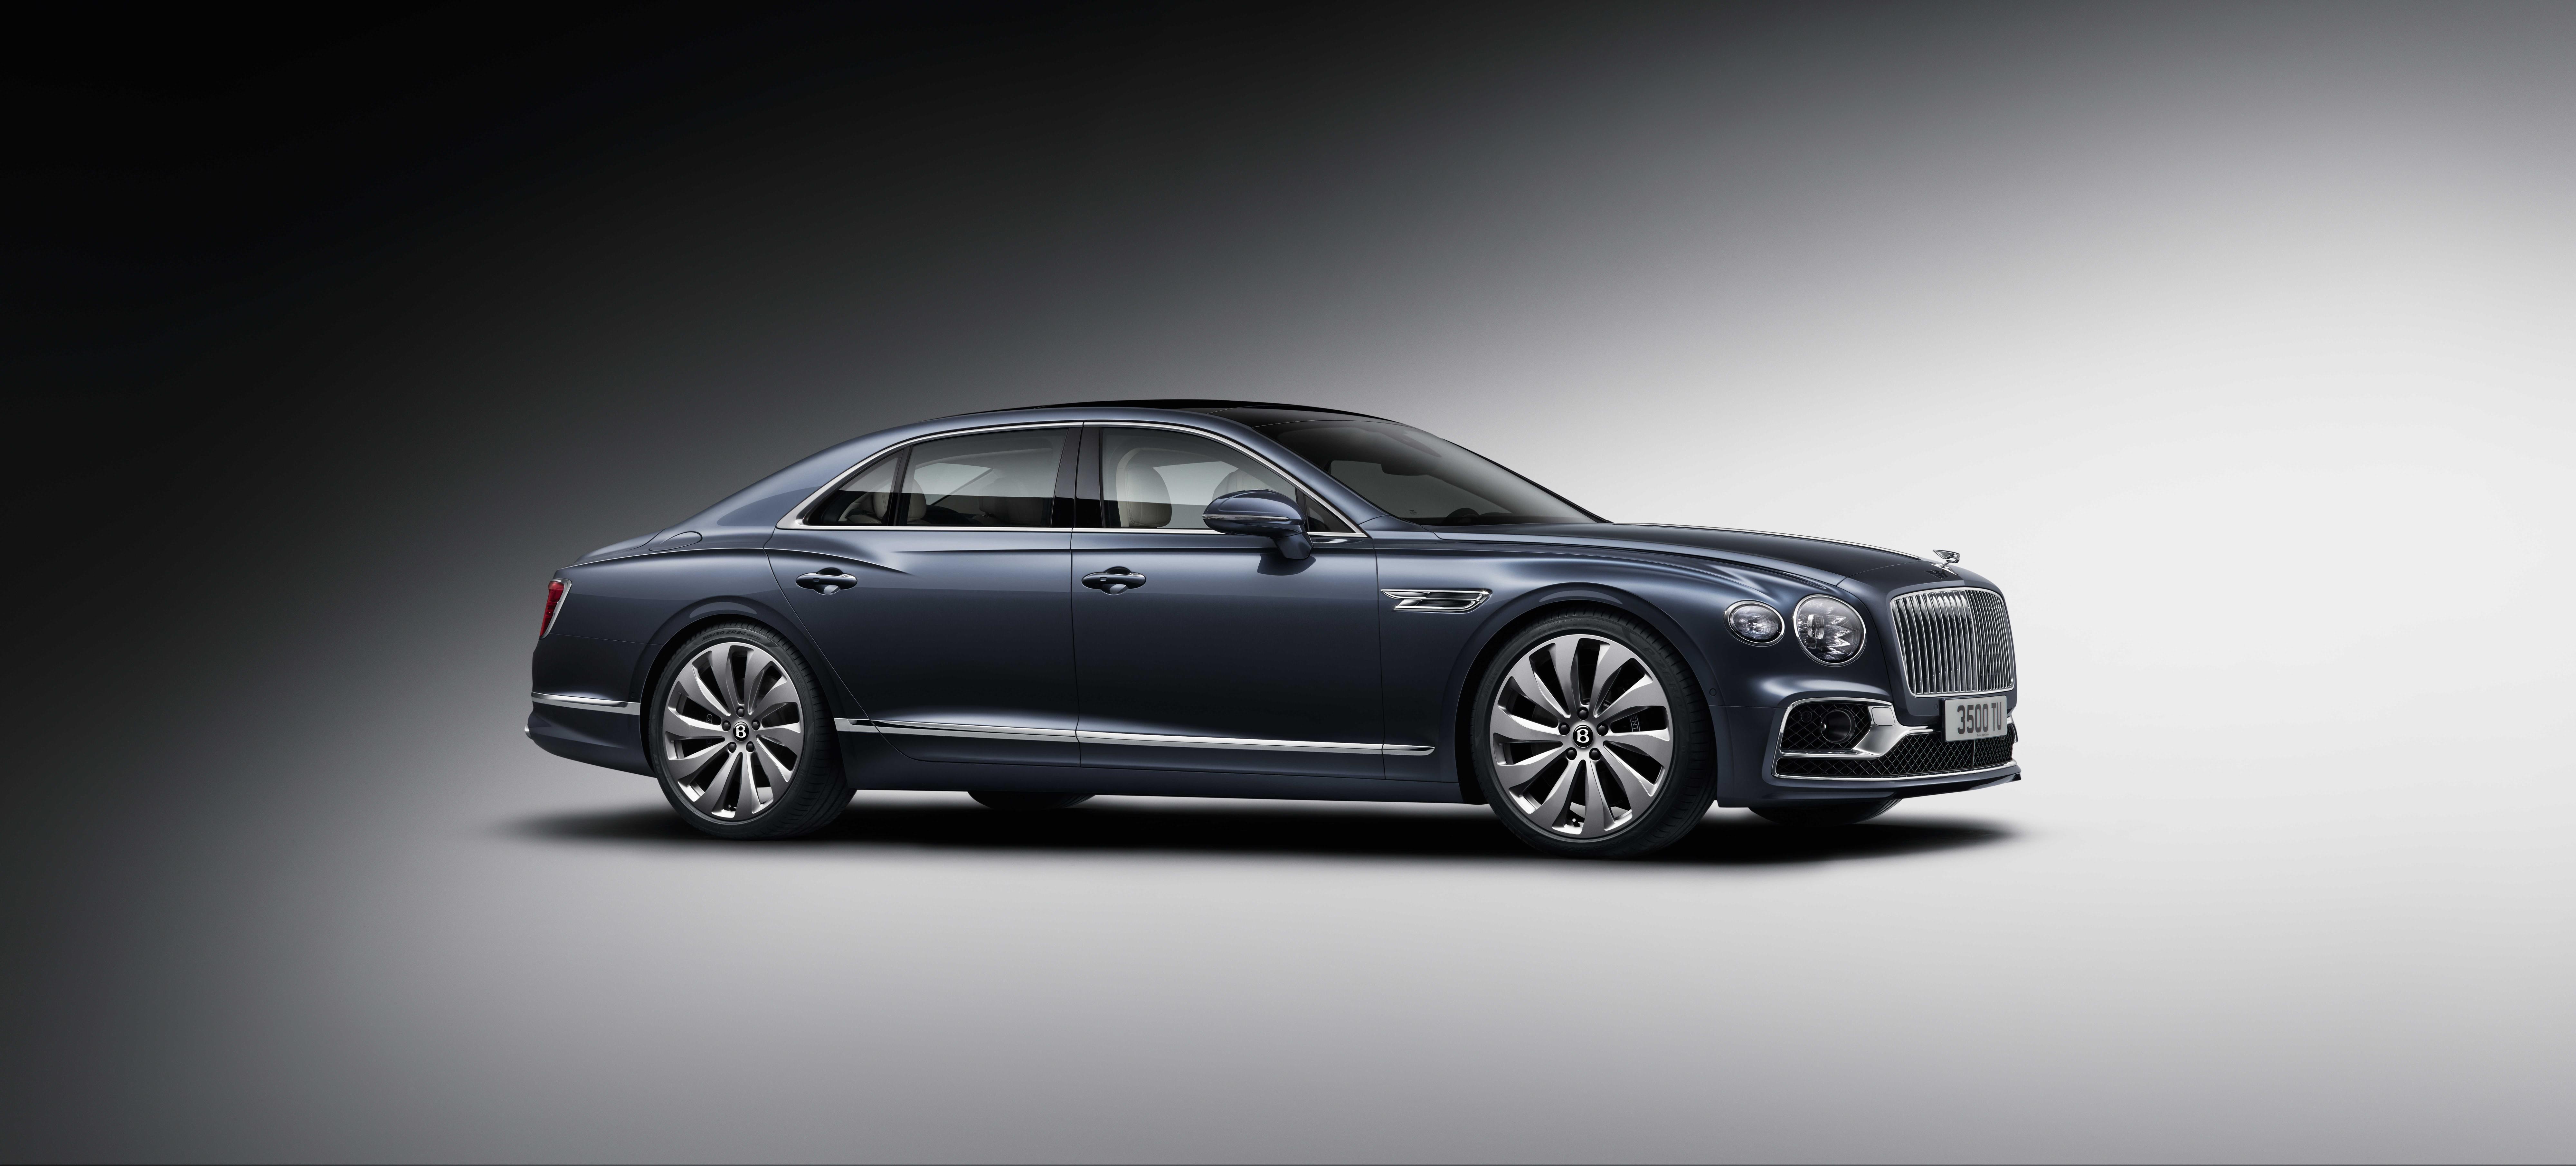 Bentley Flying Spur mod specifications